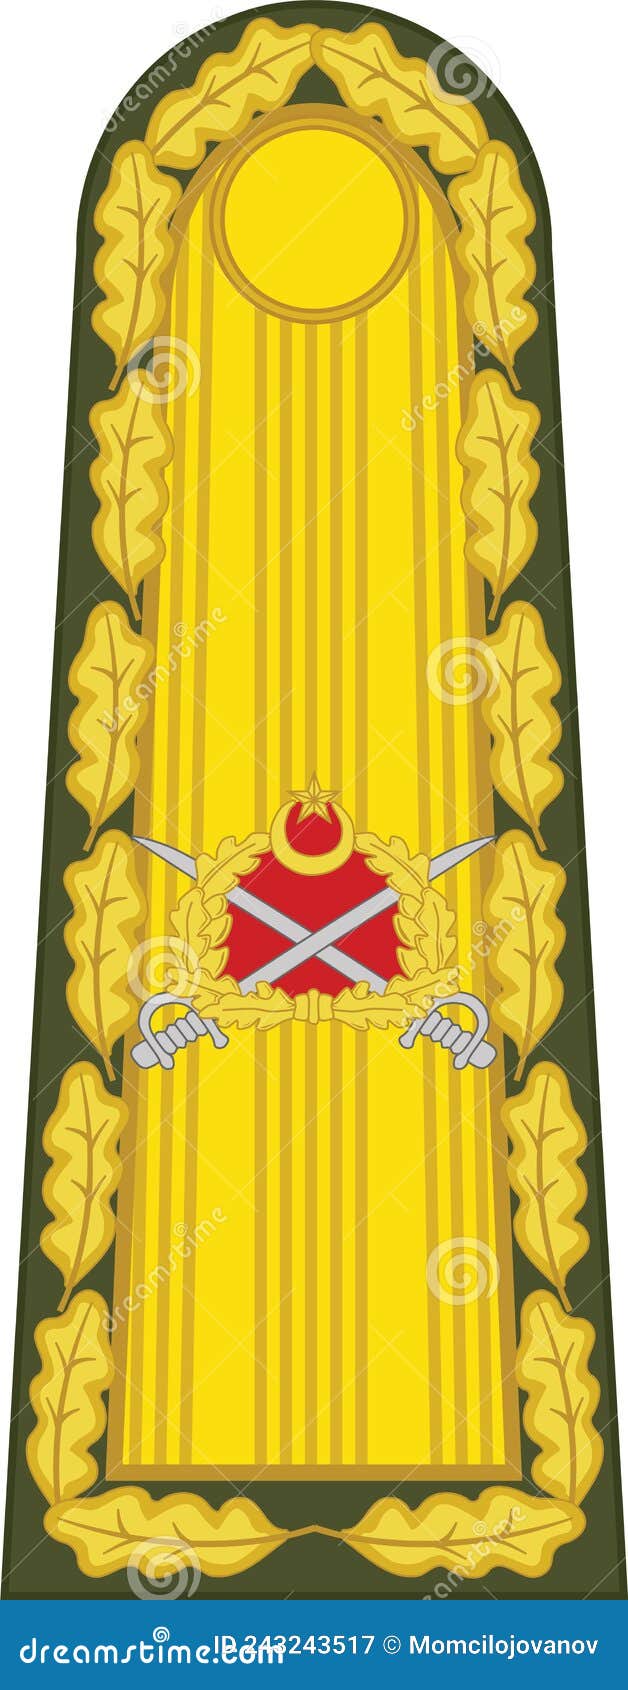 shoulder army mark insignia of the turkish mareÃÅ¾al